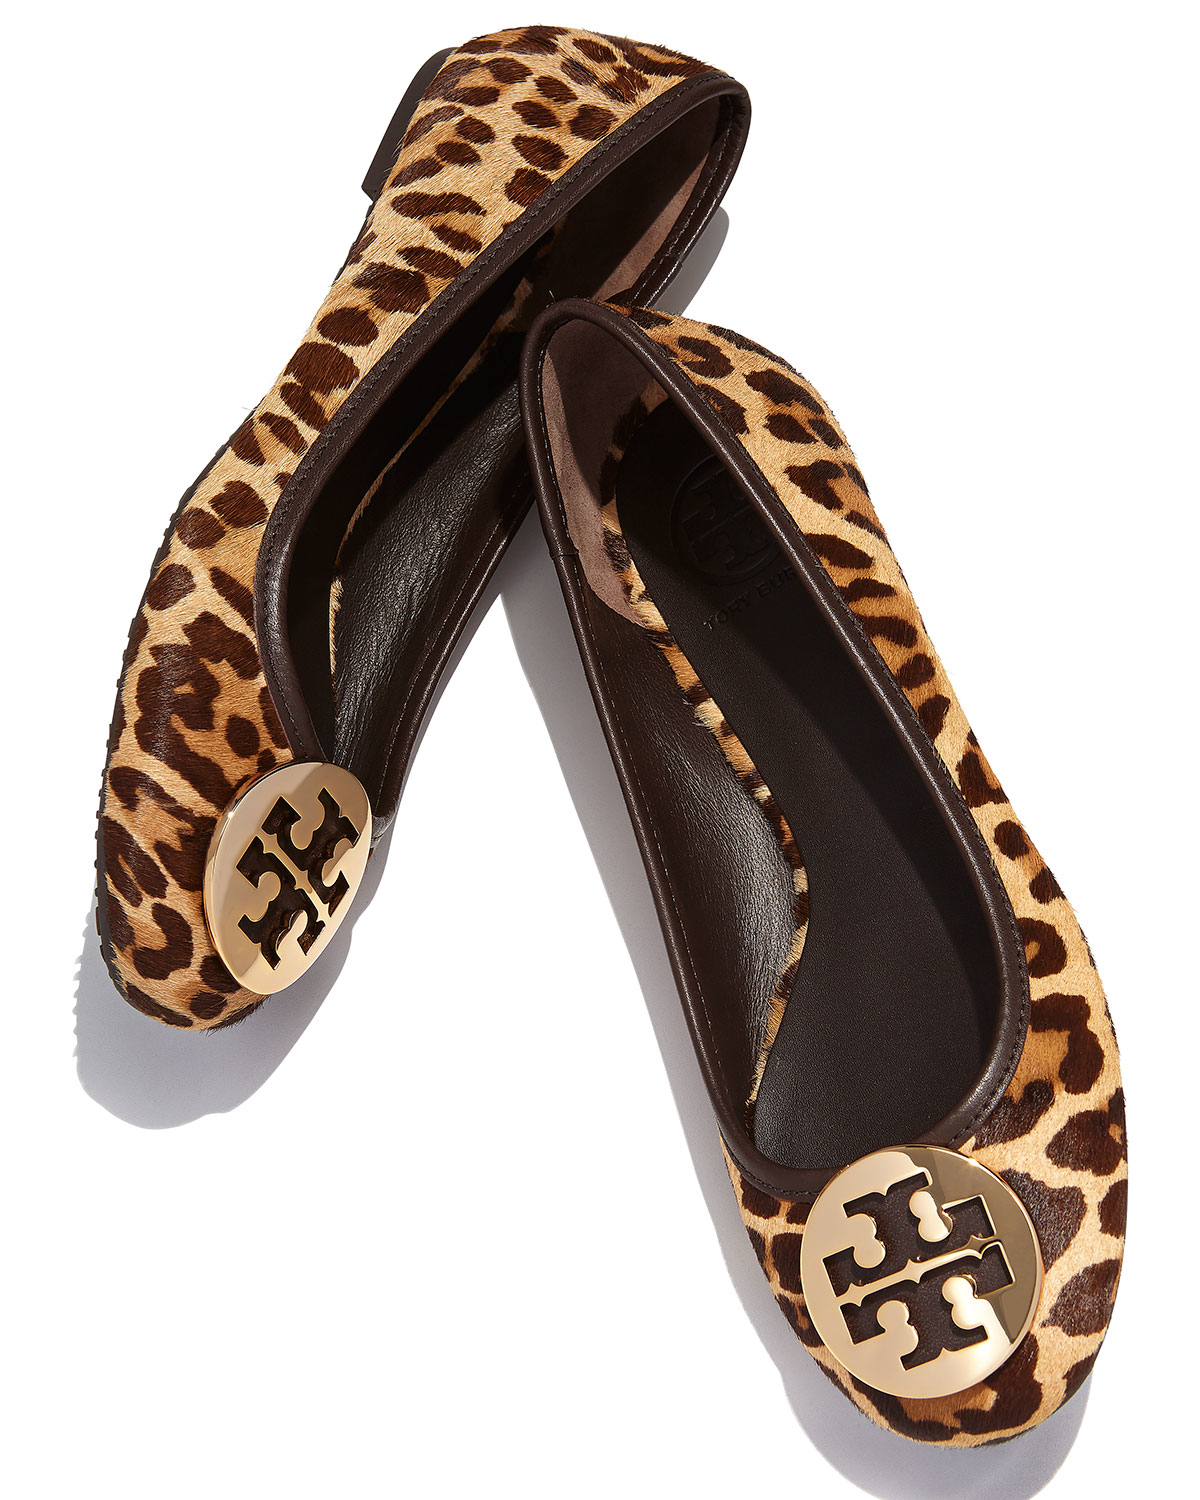 Tory Burch Leopard Print Shoes Online Hotsell, UP TO 61% OFF